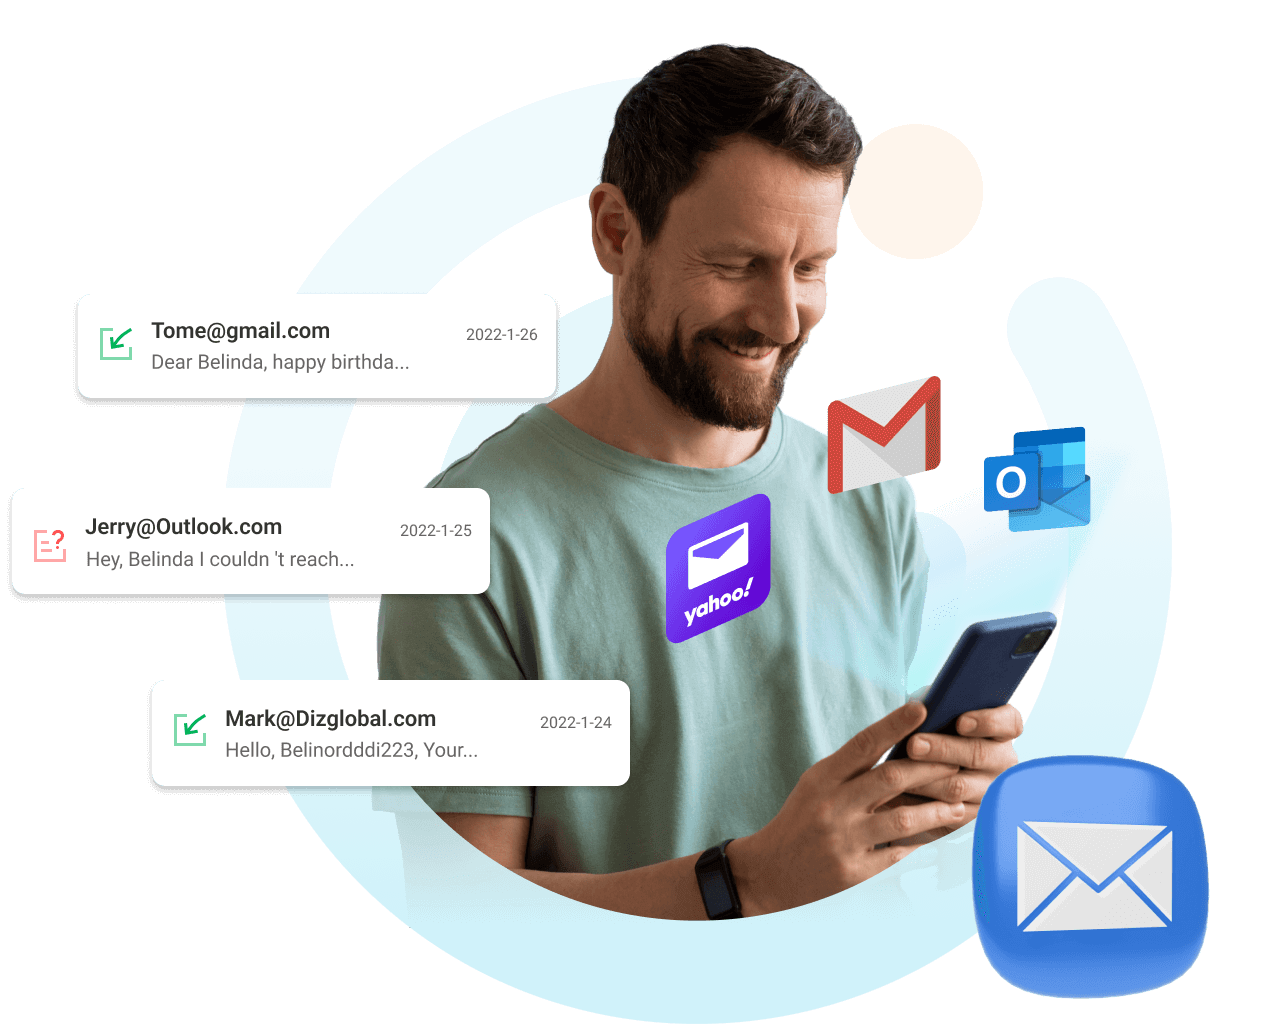 Email tracking software